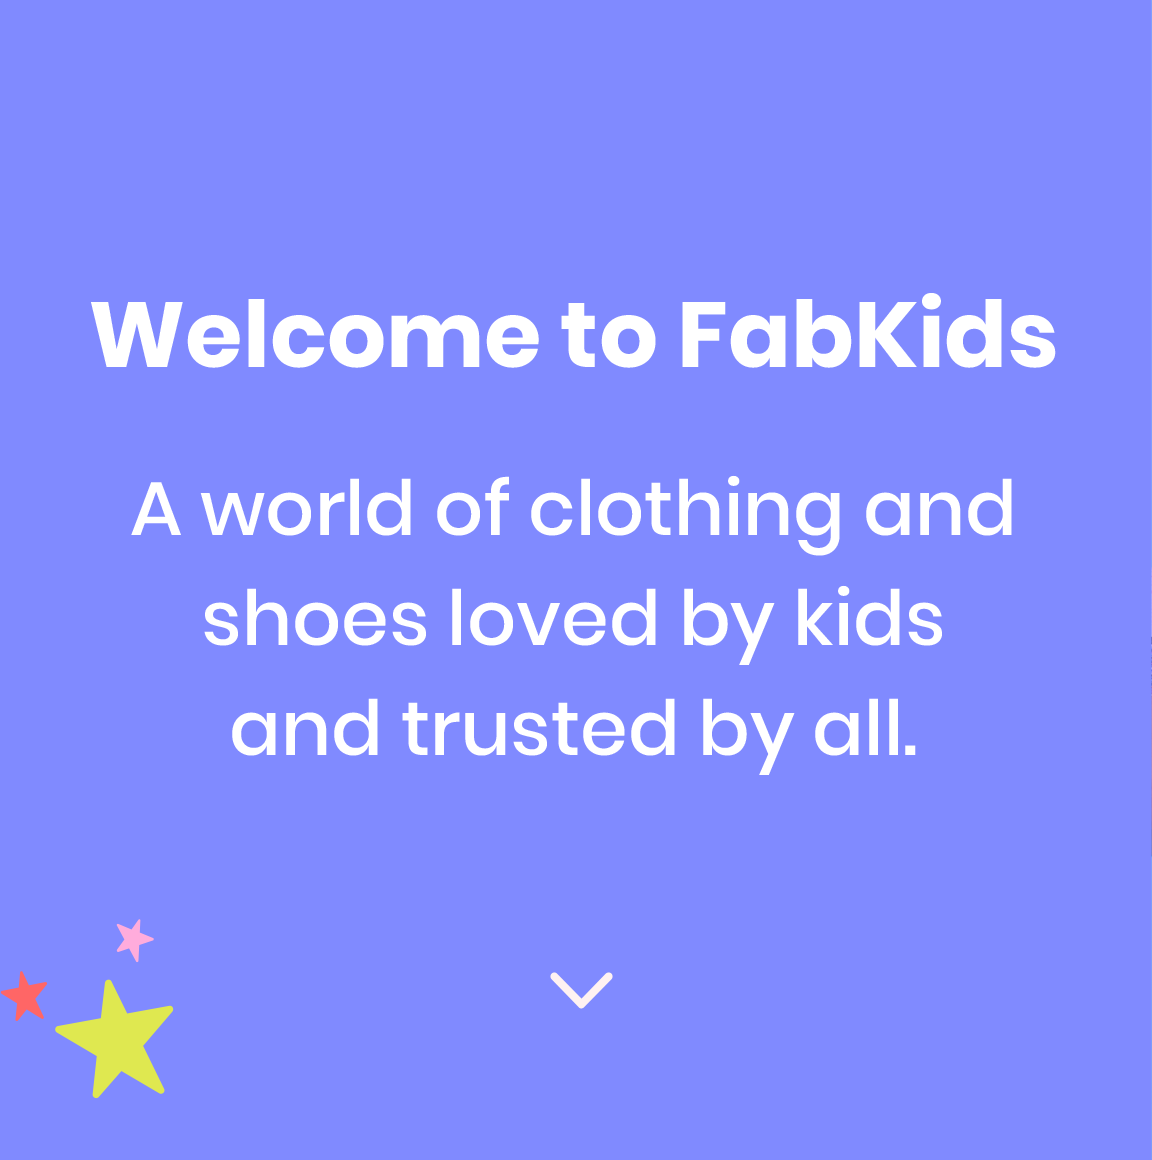 Welcome to FabKids - A world of clothing and shoes loved by kids and trusted by all.